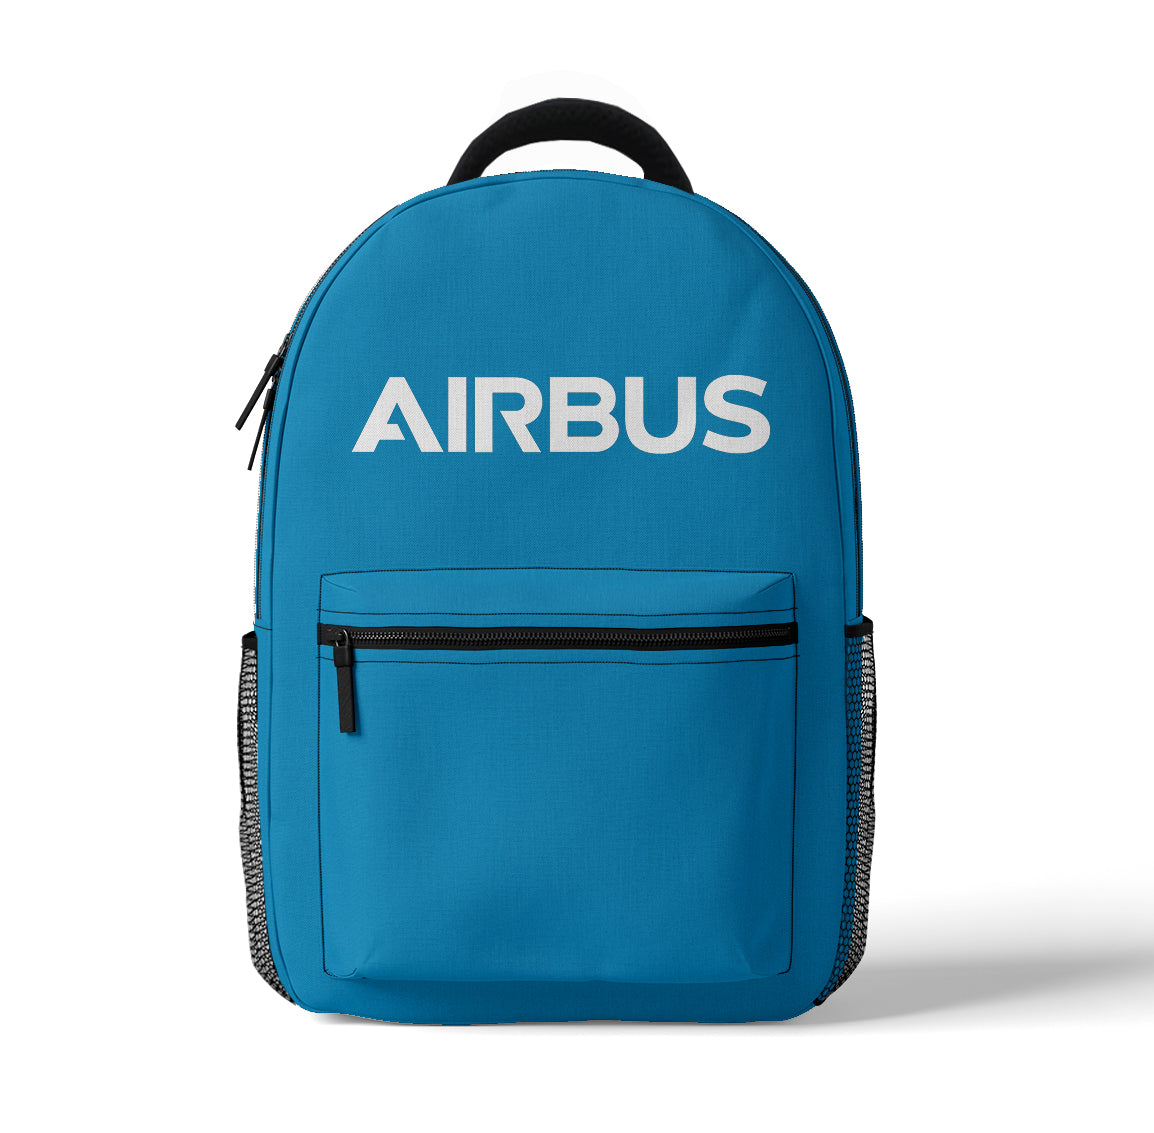 Airbus & Text Designed 3D Backpacks